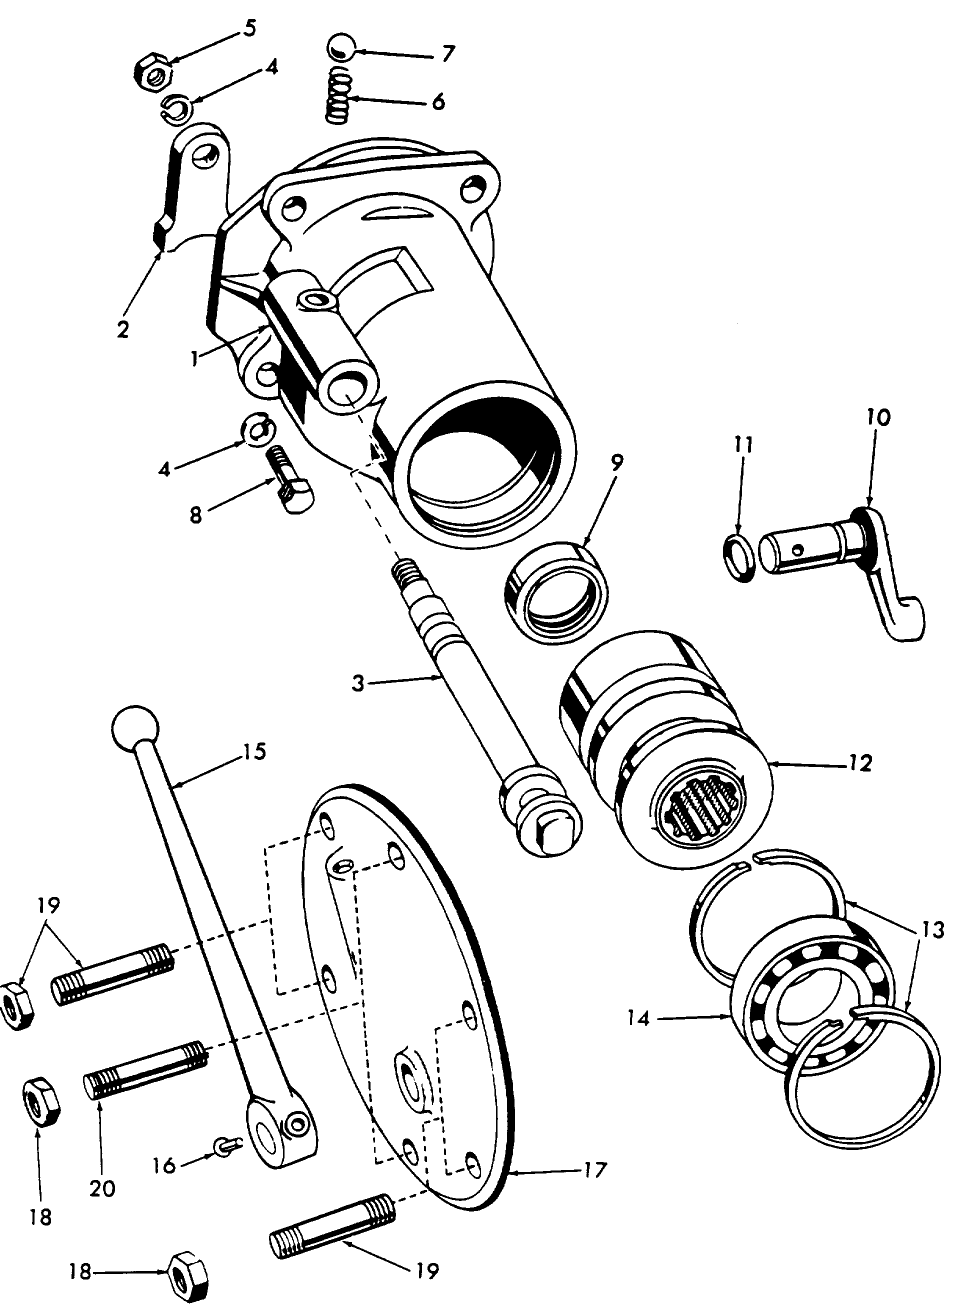 07E01 PTO SUPPORT, SHIFTER LEVER & RELATED PARTS